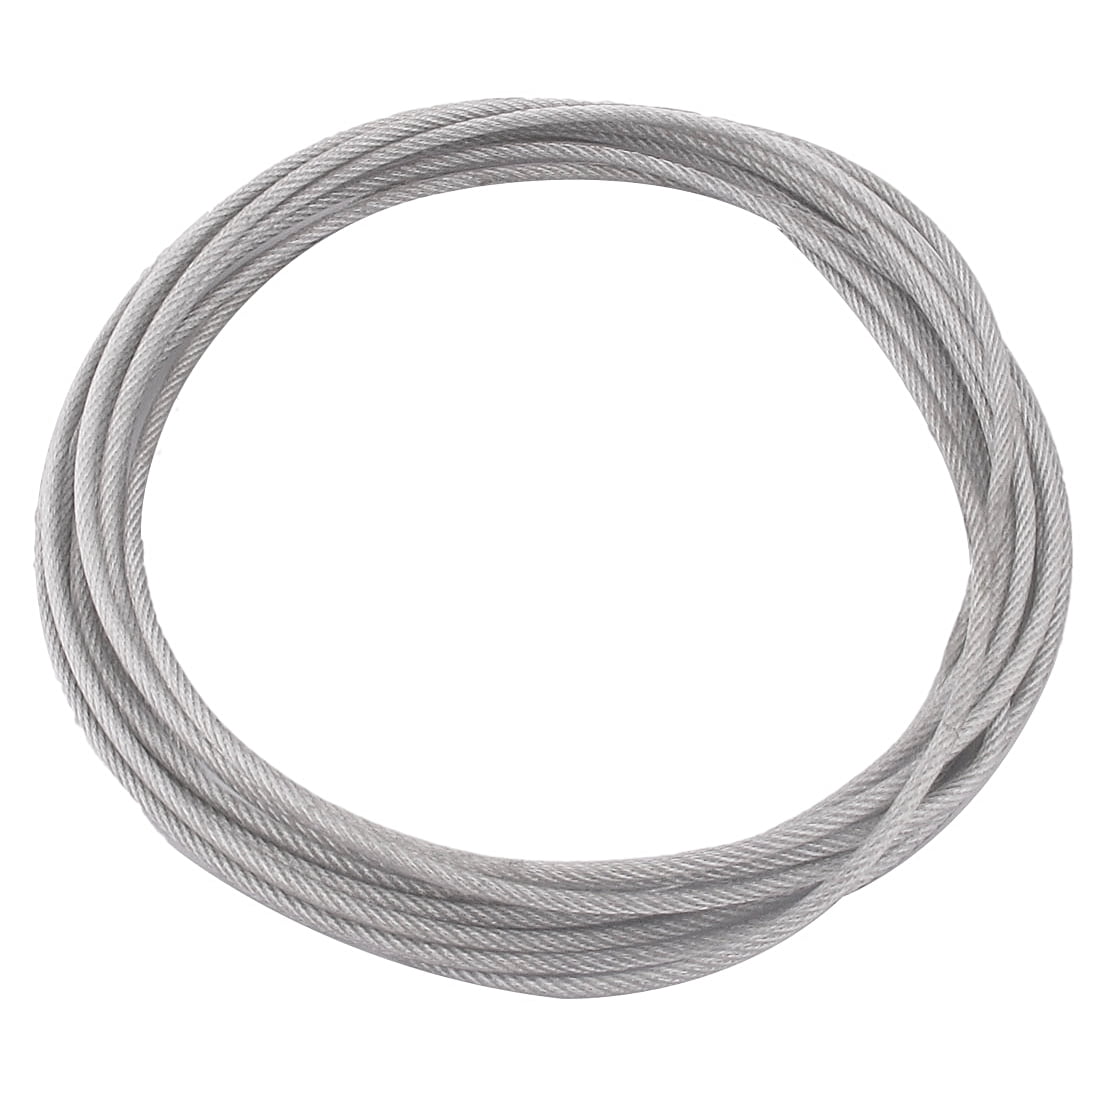 10M Length 1mm Diameter Plastic Coated Flexible Steel Wire Cable Rope